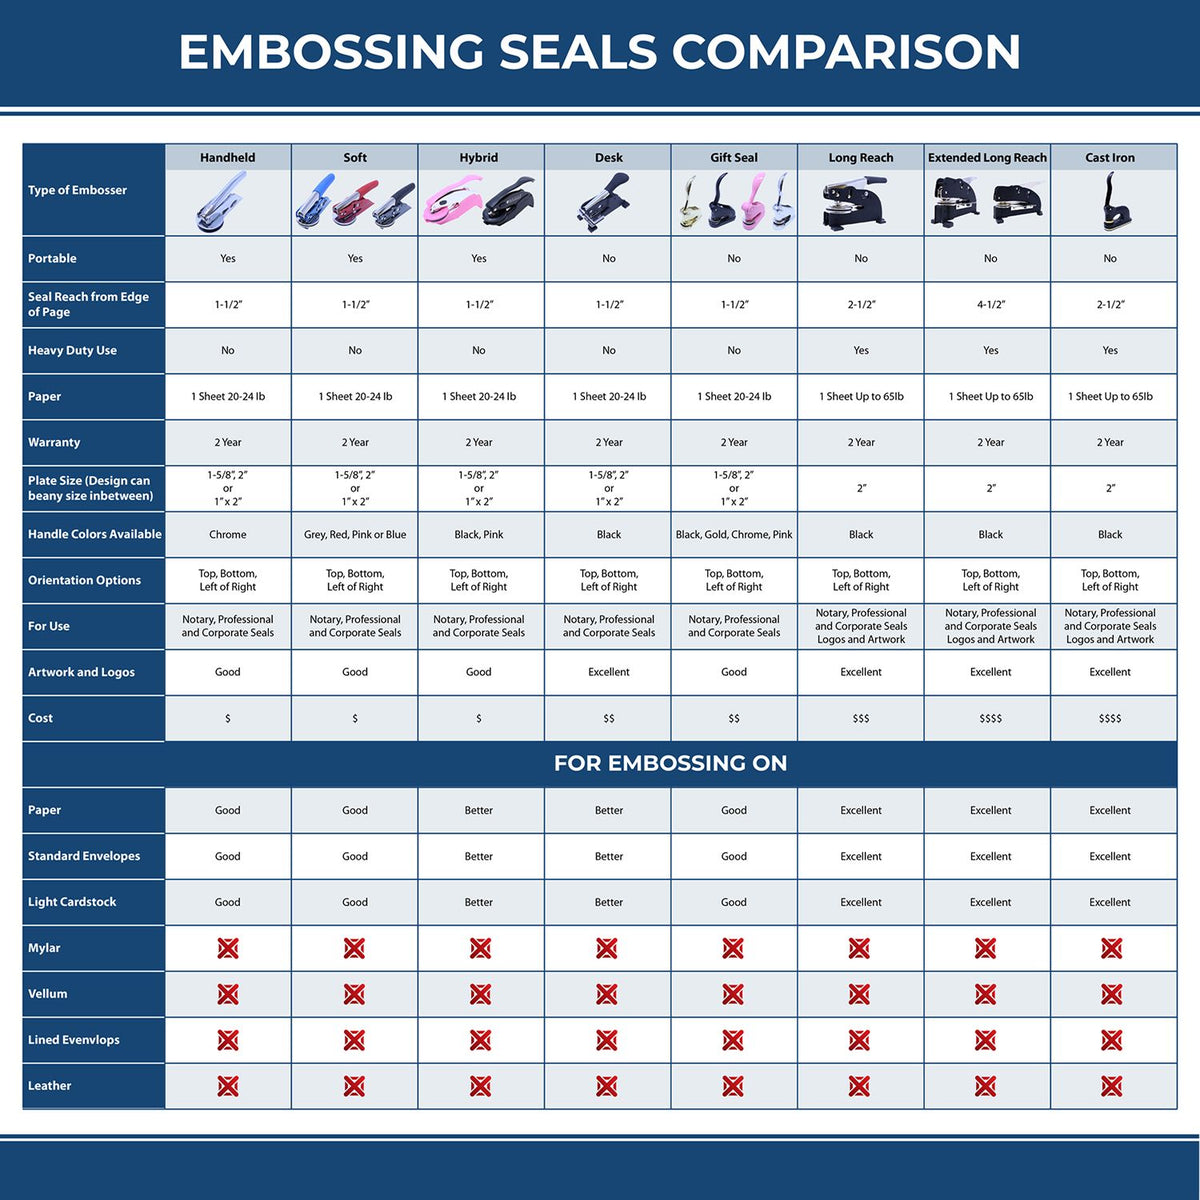 A comparison chart for the different types of mount models available for the Hybrid New Jersey Land Surveyor Seal